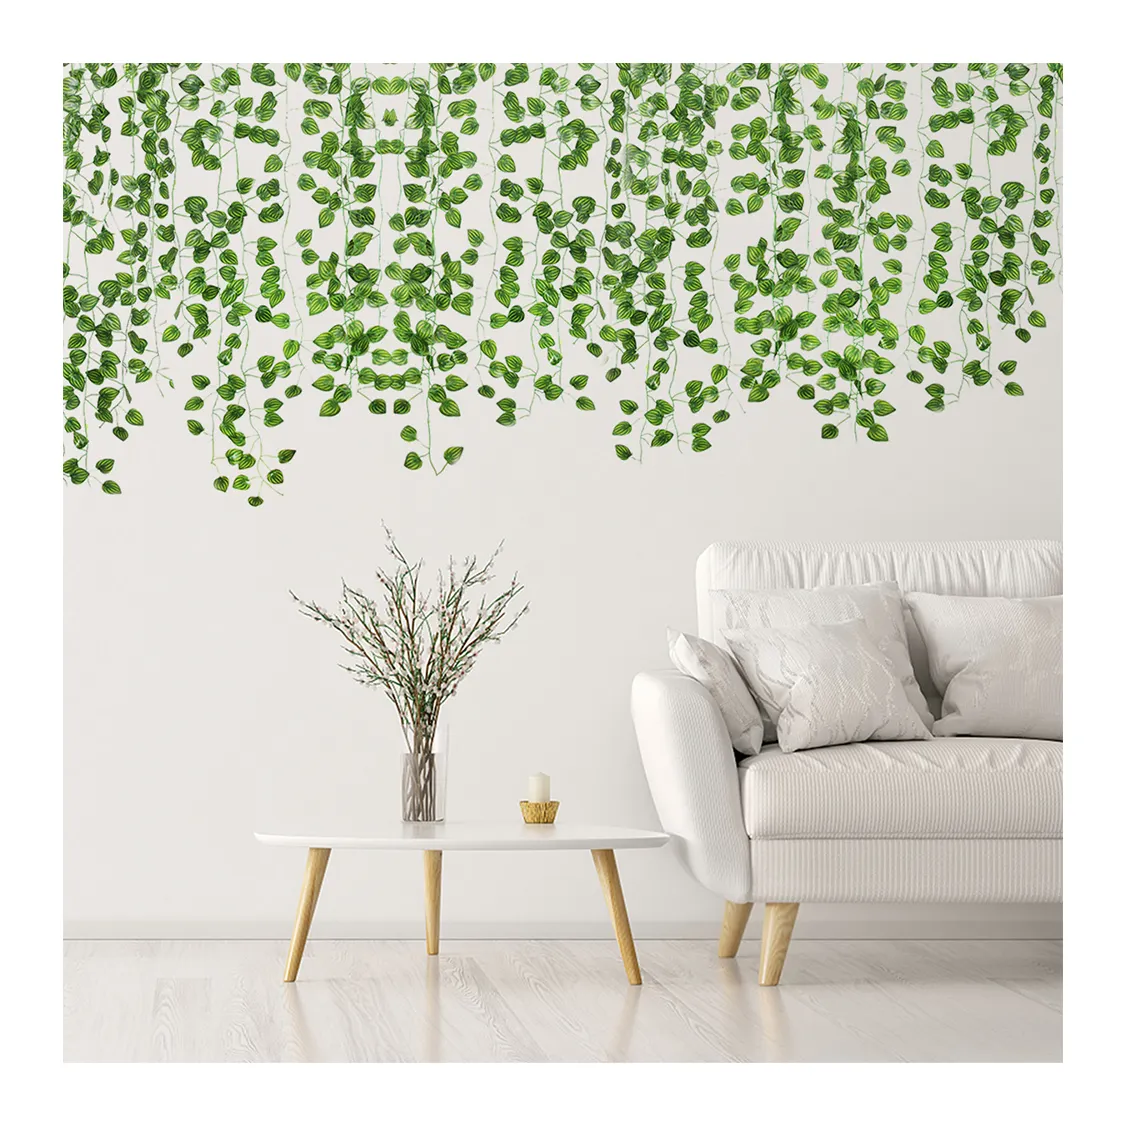 CTT-3-11 12pcs DIY Green Plant Screen Ivy Privacy Hanging Plastic Green Leaves Faux Vines for Outdoor Garden Decor